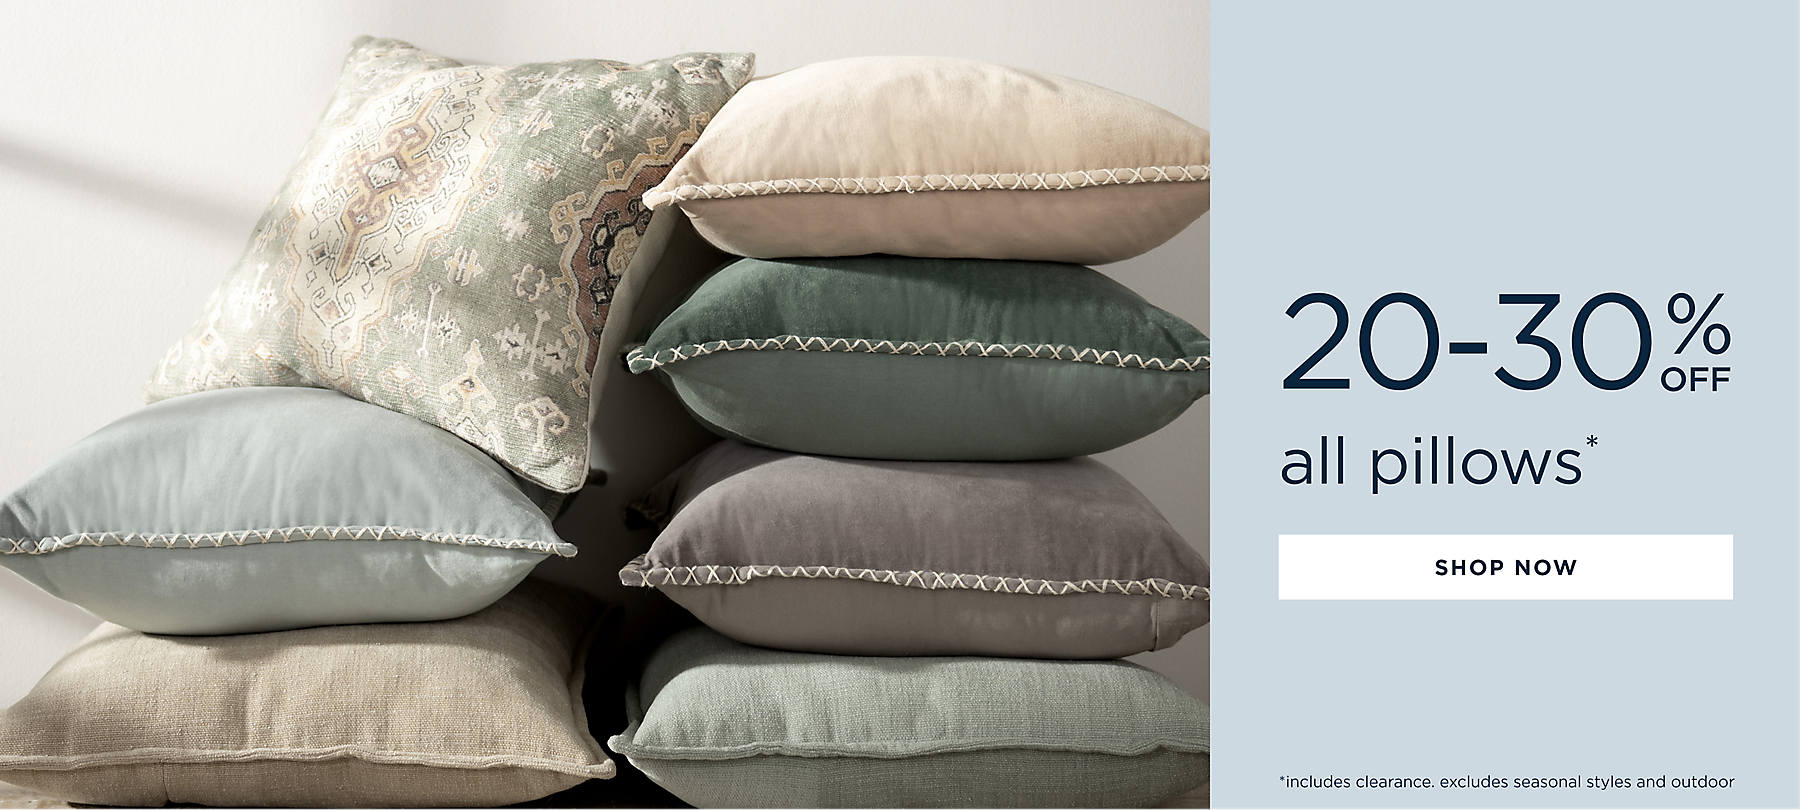 all pillows* 20-30% off *includes clearance. excludes seasonal styles and outdoor shop now